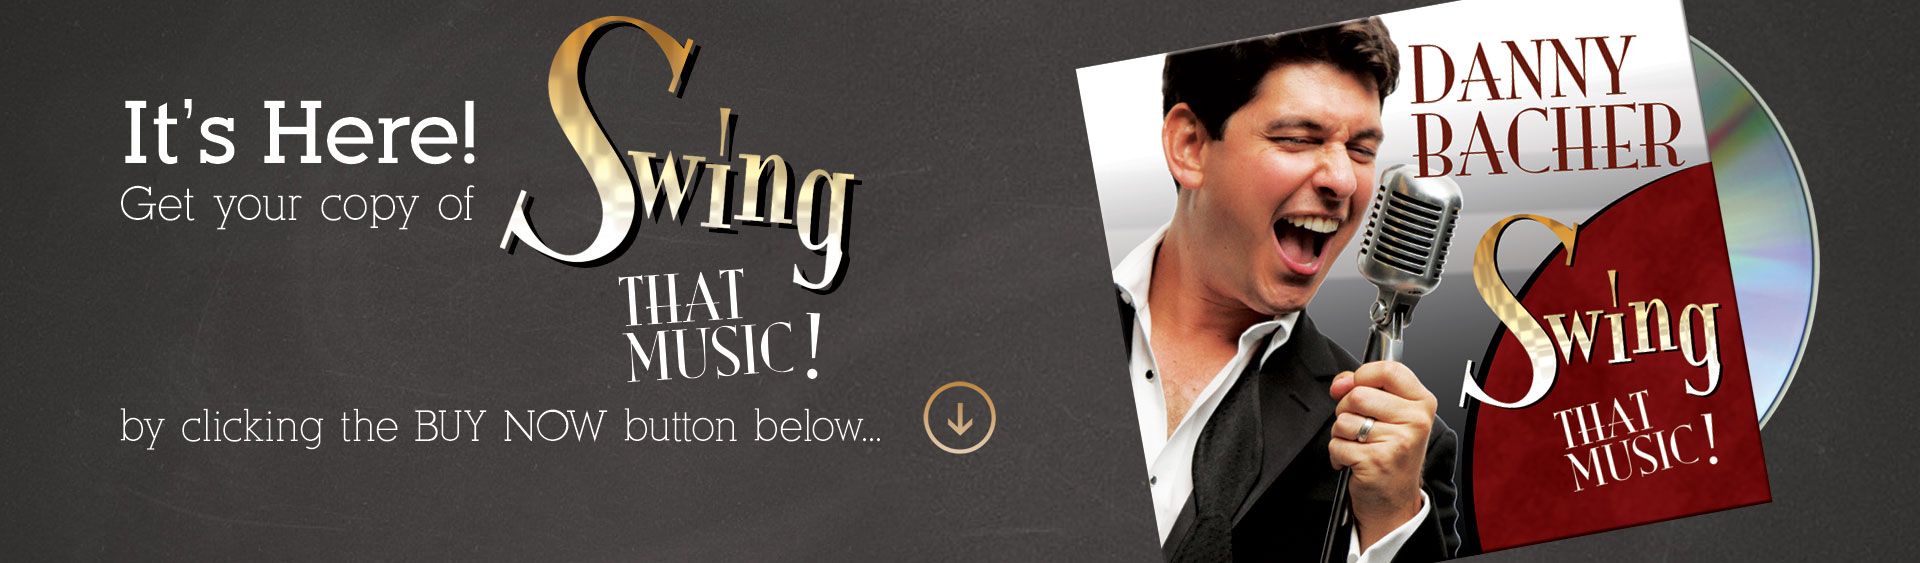 Get your copy of Swing That Music!